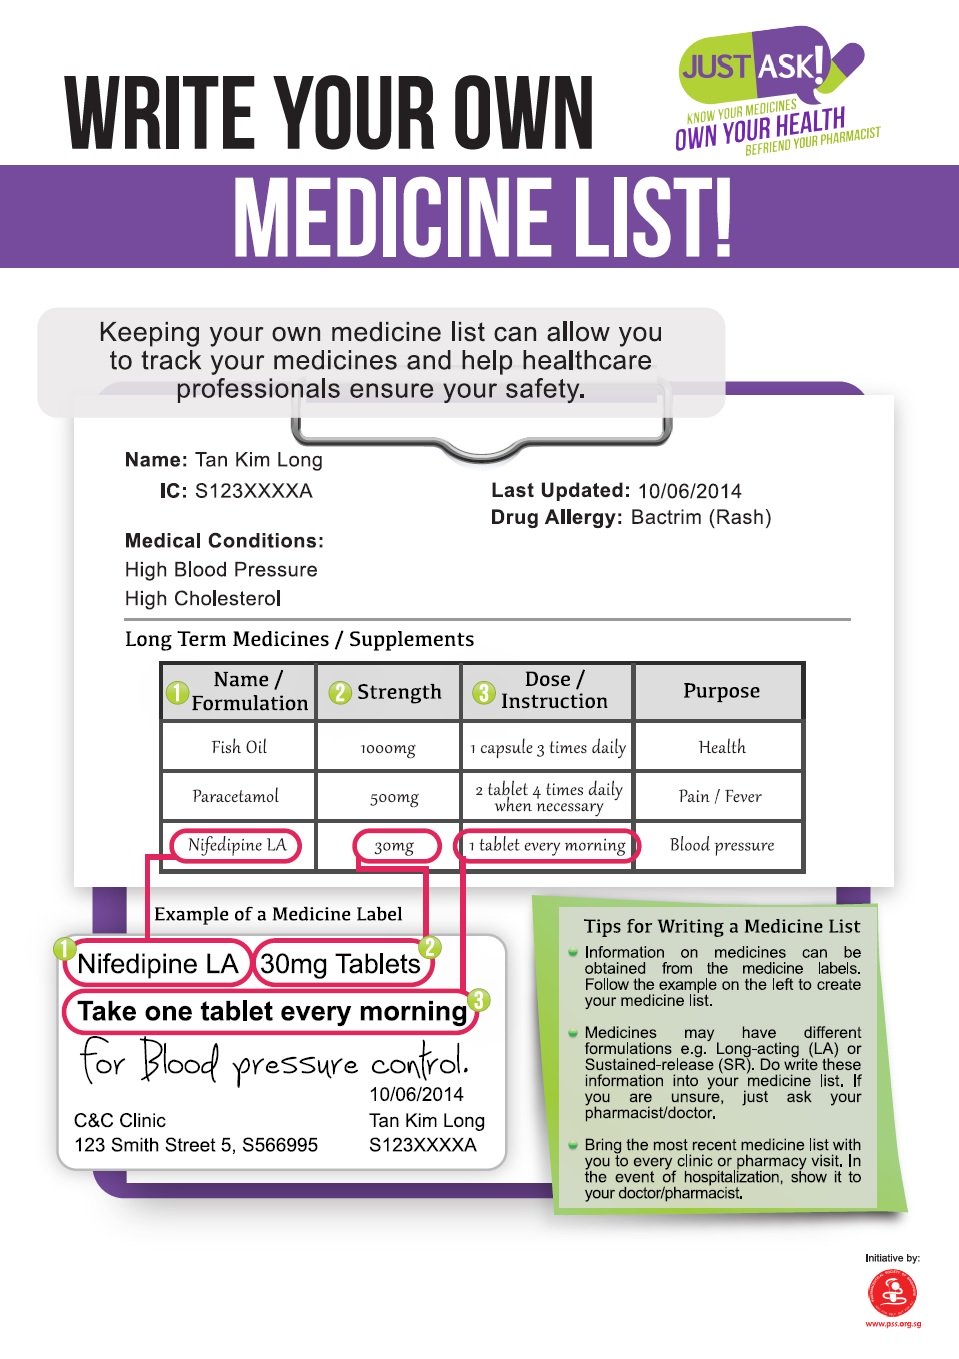 Medication List Template For Patients from www.pss.org.sg